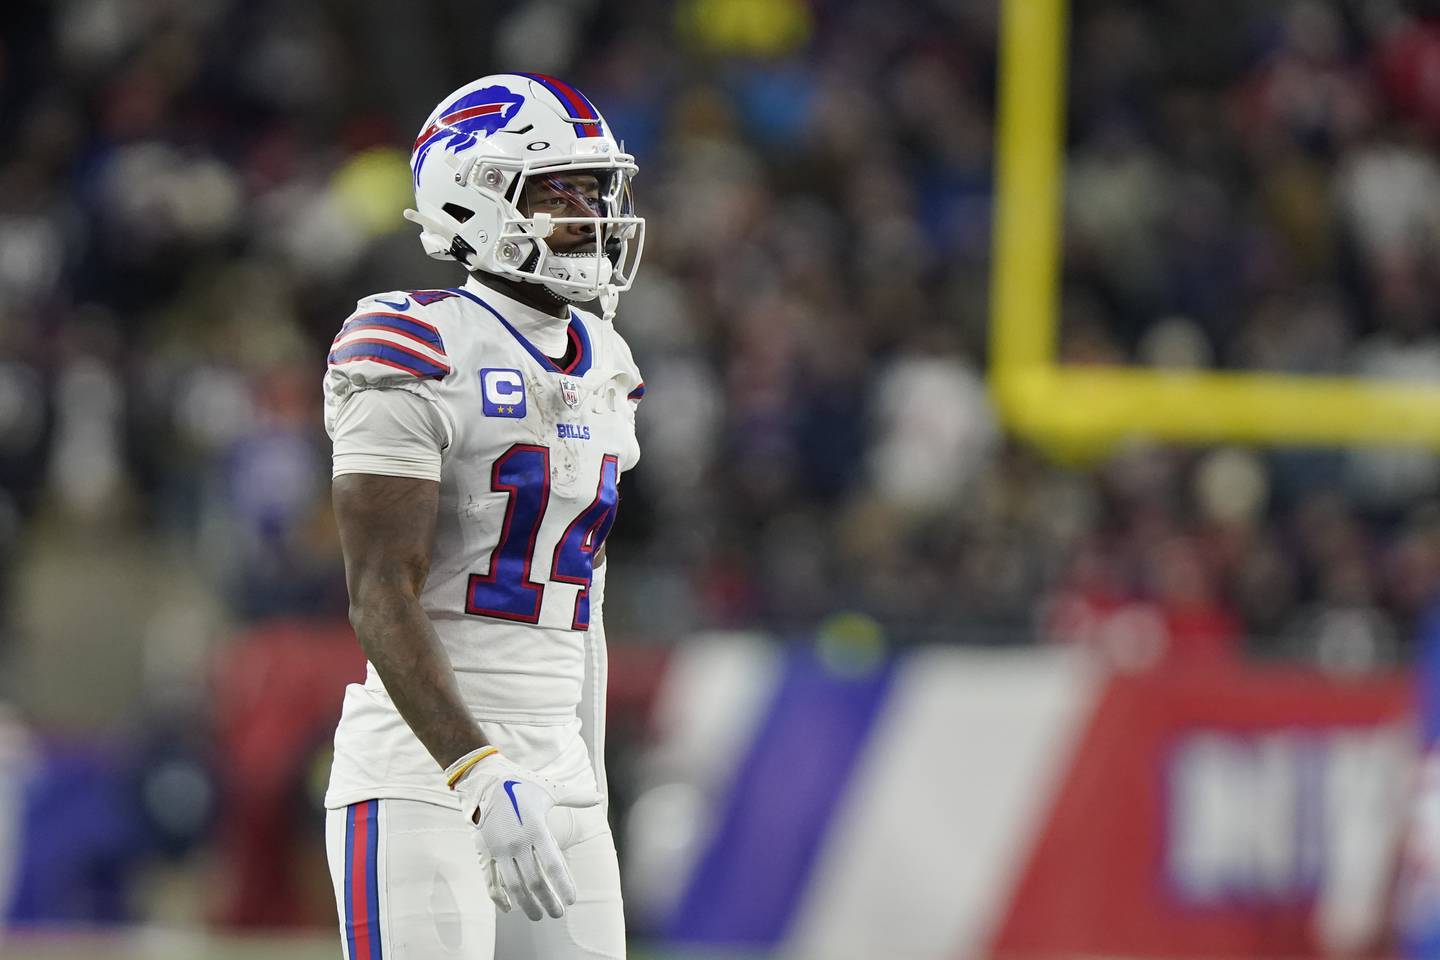 Bills wide receiver Stefon Diggs during the a game on Dec. 1, 2022.